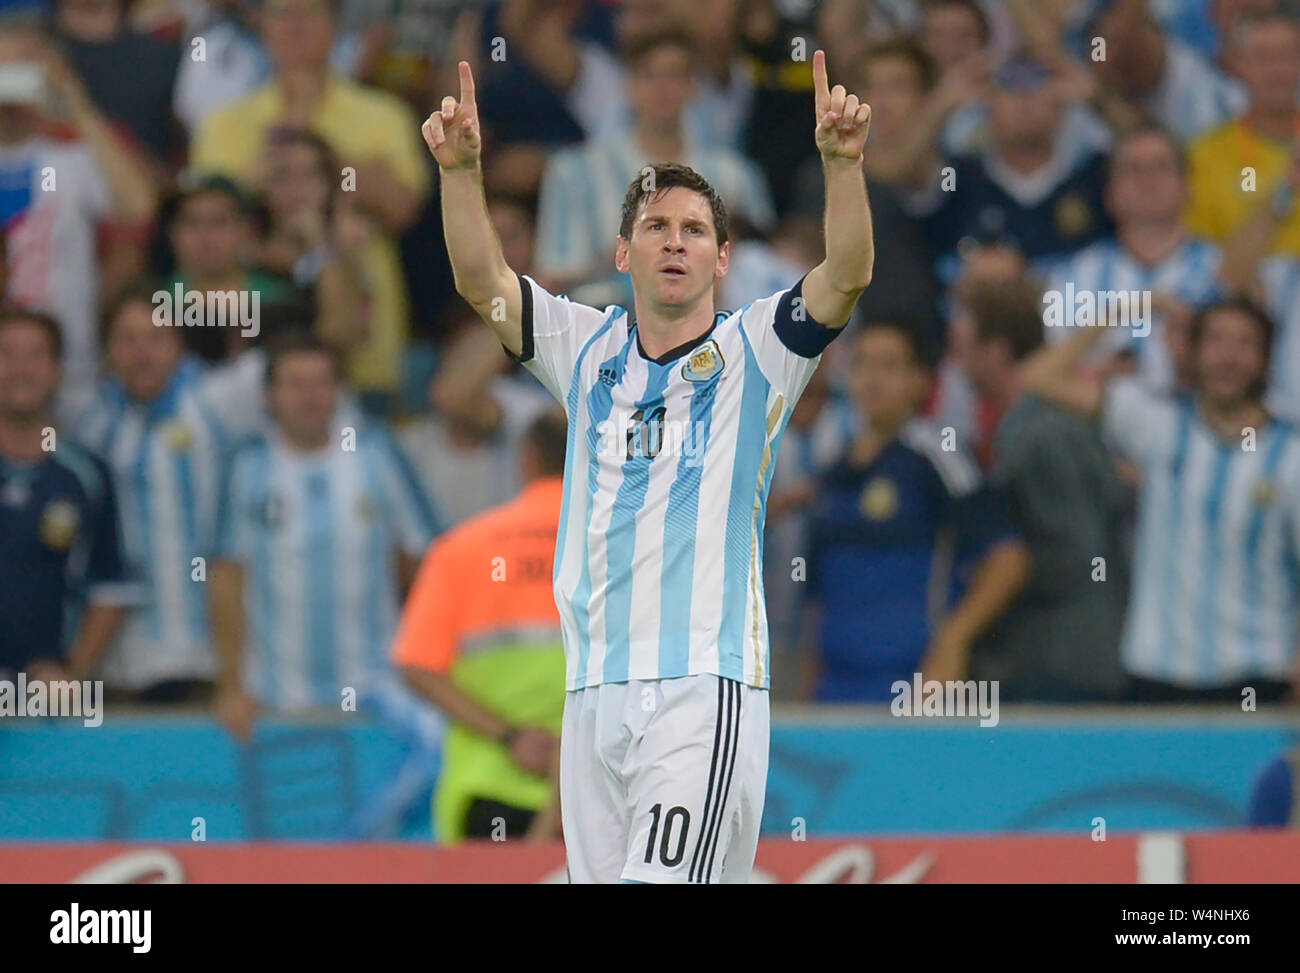 Argentine soccer player Leonel Messi, during the match Argentina vs Bosnia for the 2014 World Cup, at the Maracanã Stadium, in the city of Rio de Jane Stock Photo